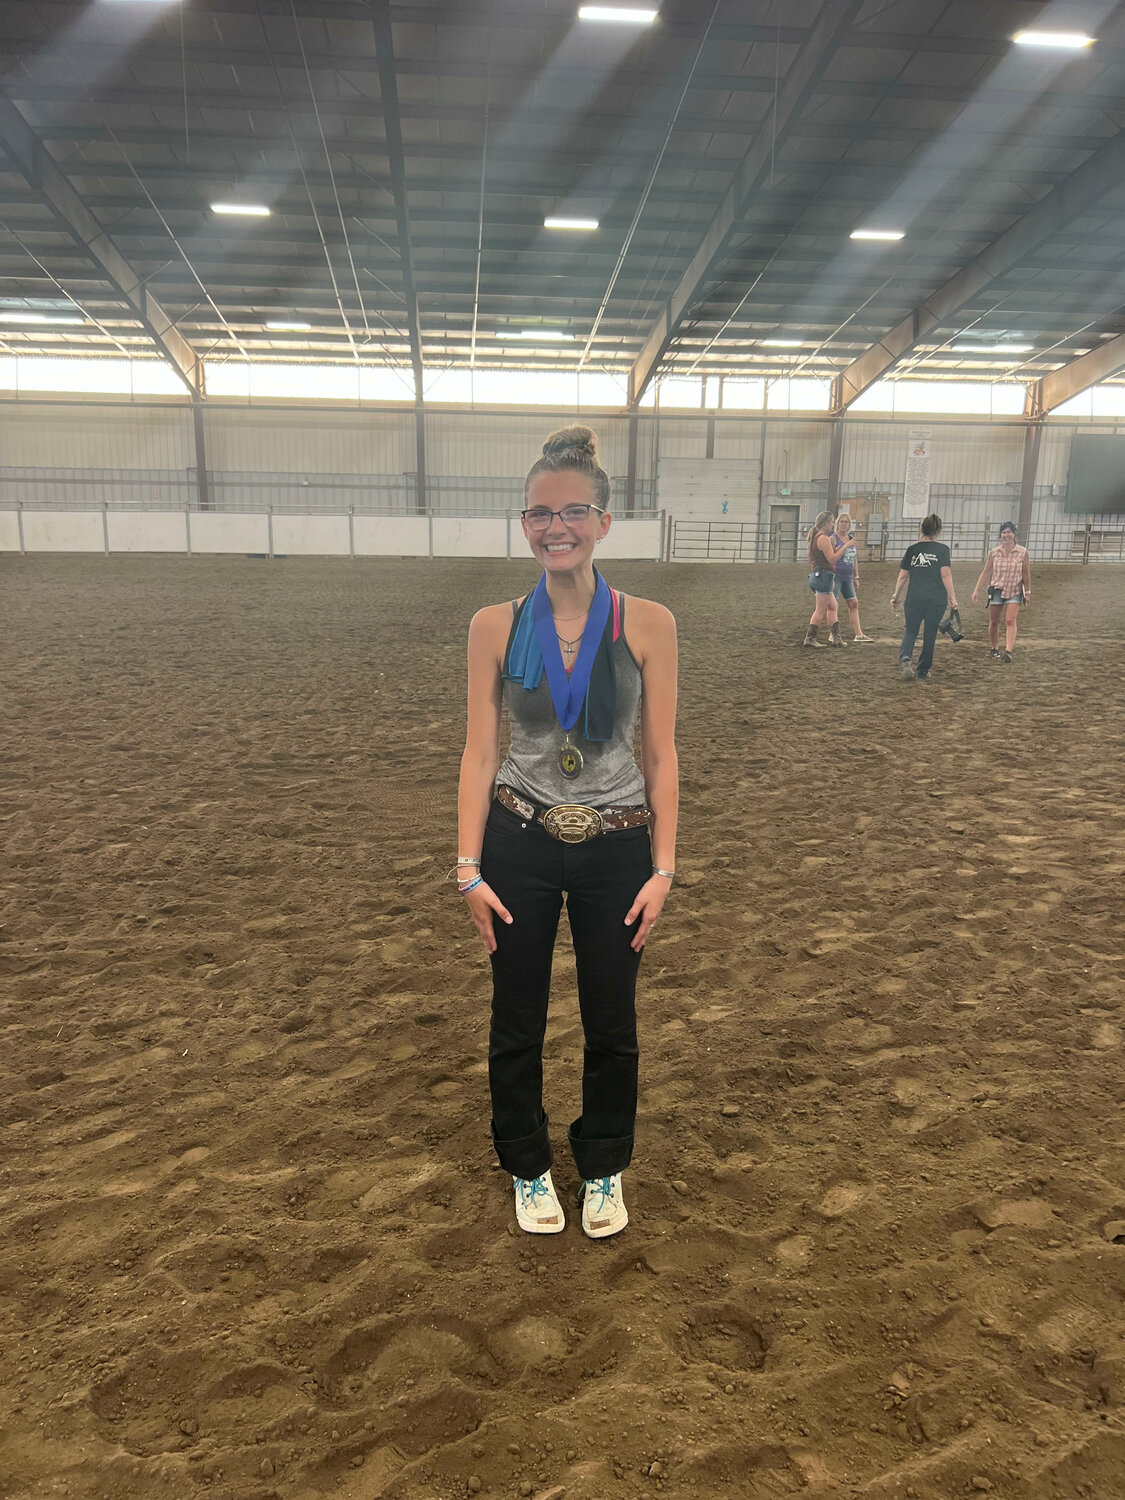 Savanna Dorning and her horse Guido that placed gold at state in reining and are going to defend their regional title for her senior year at PNWIC.